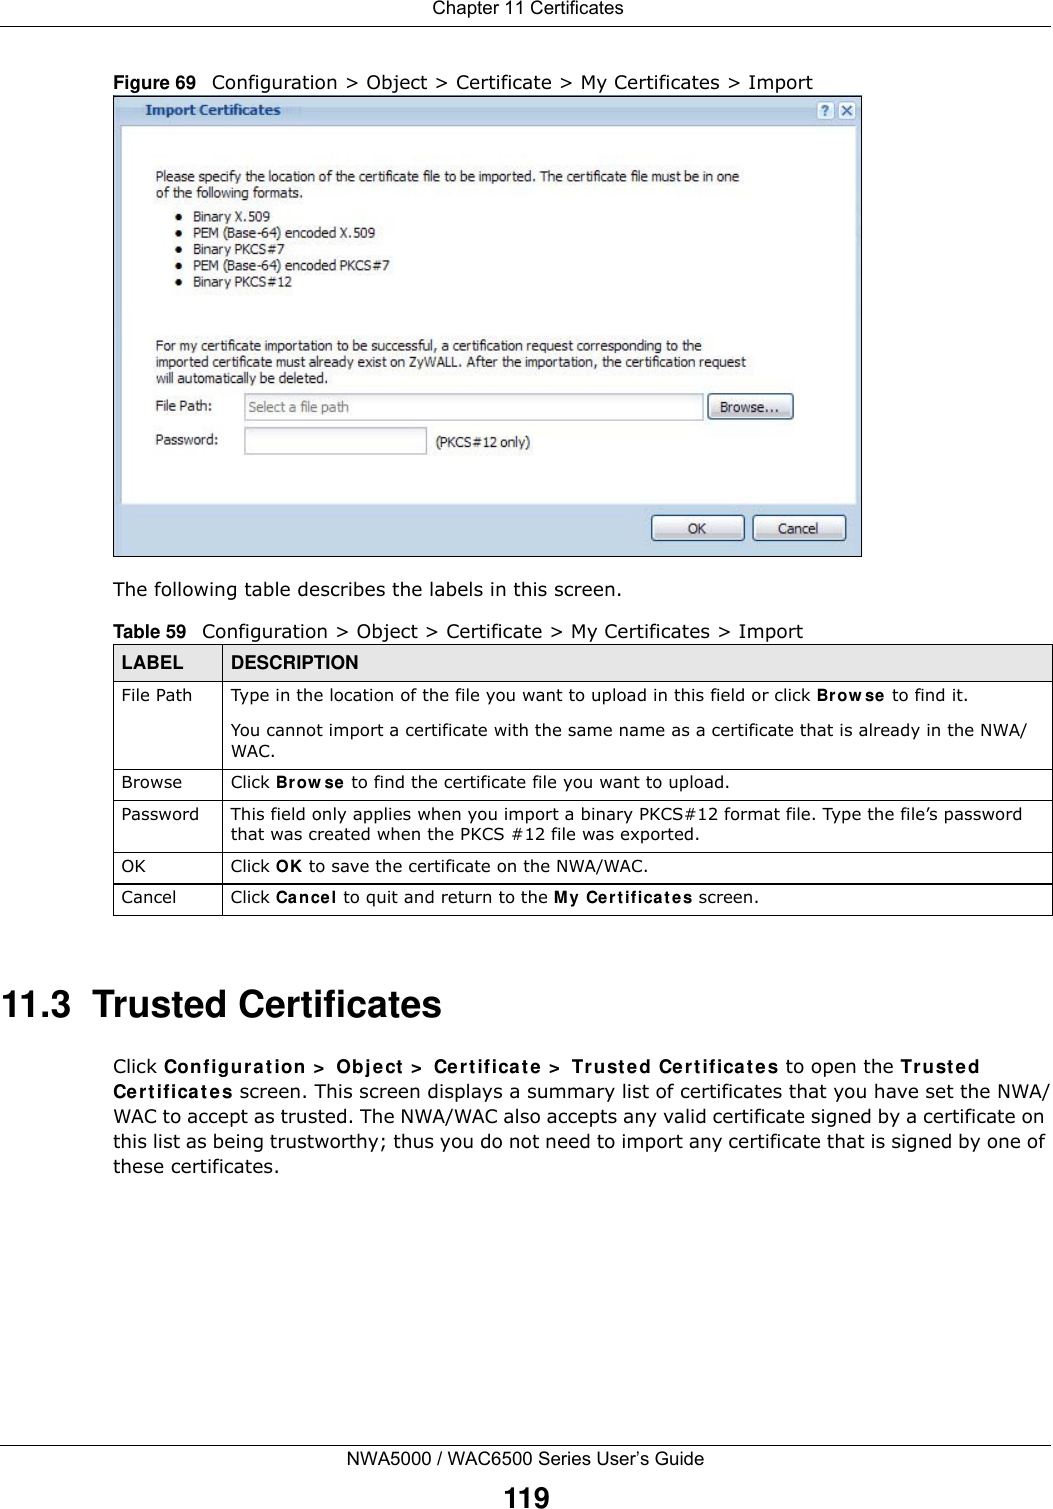  Chapter 11 CertificatesNWA5000 / WAC6500 Series User’s Guide119Figure 69   Configuration &gt; Object &gt; Certificate &gt; My Certificates &gt; ImportThe following table describes the labels in this screen.  11.3  Trusted CertificatesClick Configu rat ion  &gt;  Object  &gt;  Cer t ifica t e &gt;  Trust ed Cert ifica t es to open the Tr ust ed Ce r t if ica t e s screen. This screen displays a summary list of certificates that you have set the NWA/WAC to accept as trusted. The NWA/WAC also accepts any valid certificate signed by a certificate on this list as being trustworthy; thus you do not need to import any certificate that is signed by one of these certificates. Table 59   Configuration &gt; Object &gt; Certificate &gt; My Certificates &gt; ImportLABEL DESCRIPTIONFile Path  Type in the location of the file you want to upload in this field or click Brow se to find it.You cannot import a certificate with the same name as a certificate that is already in the NWA/WAC.Browse Click Brow se to find the certificate file you want to upload. Password This field only applies when you import a binary PKCS#12 format file. Type the file’s password that was created when the PKCS #12 file was exported. OK Click OK to save the certificate on the NWA/WAC.Cancel Click Cance l to quit and return to the My Certificat e s screen.